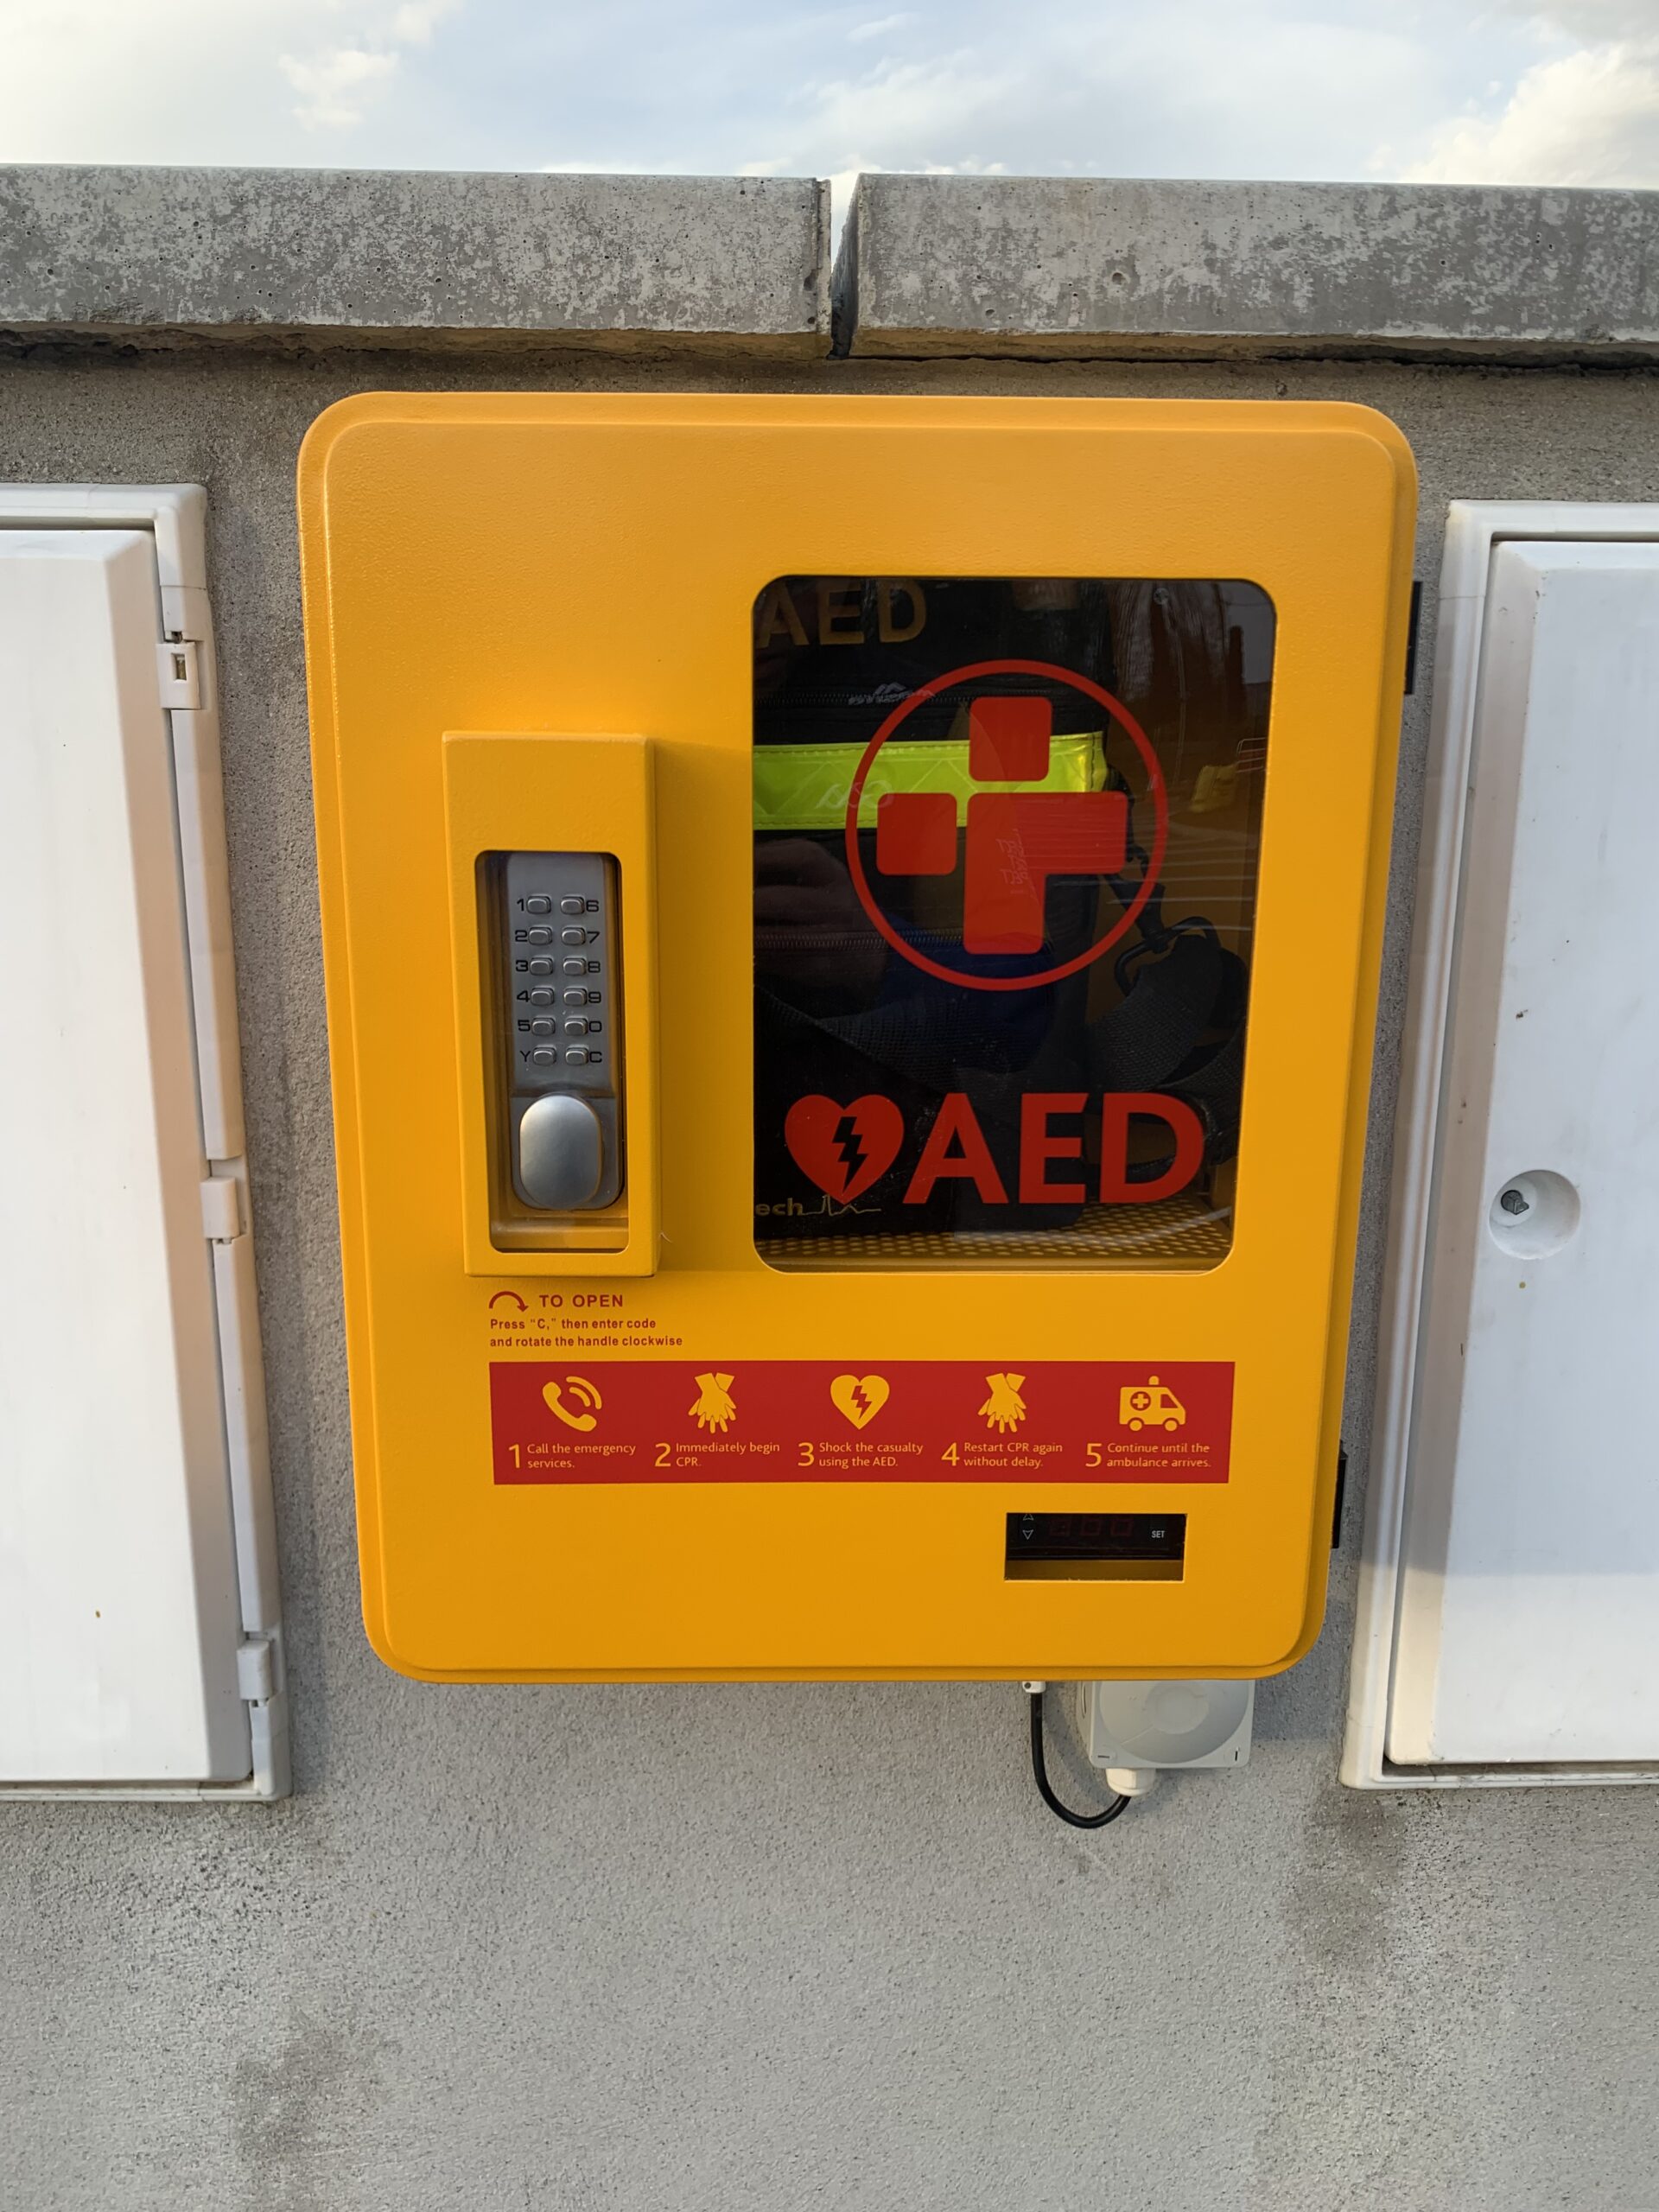 Club Defibrillator now available to the Public...